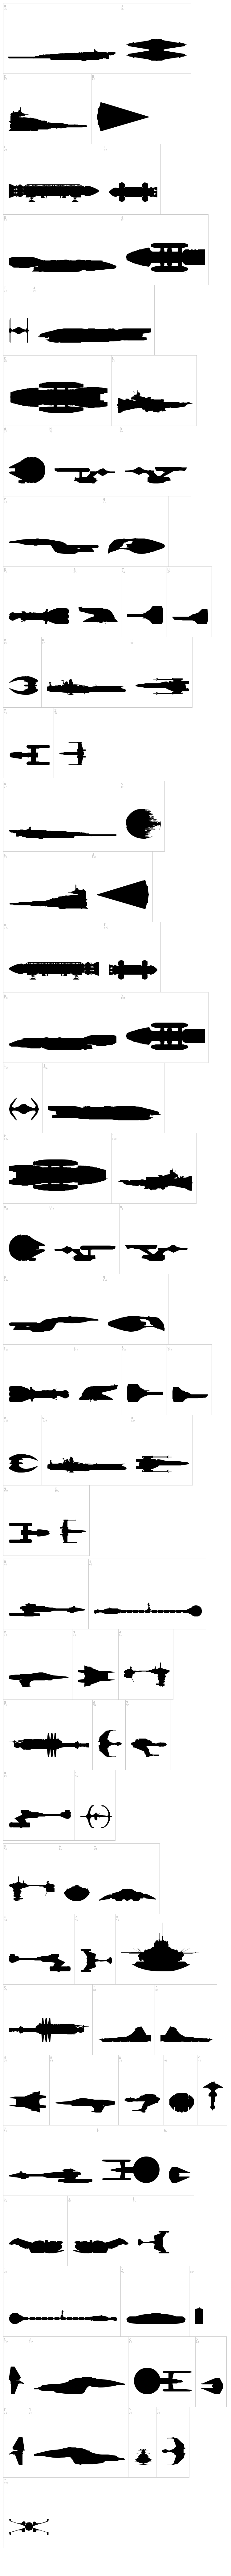 Famous Spaceships font map